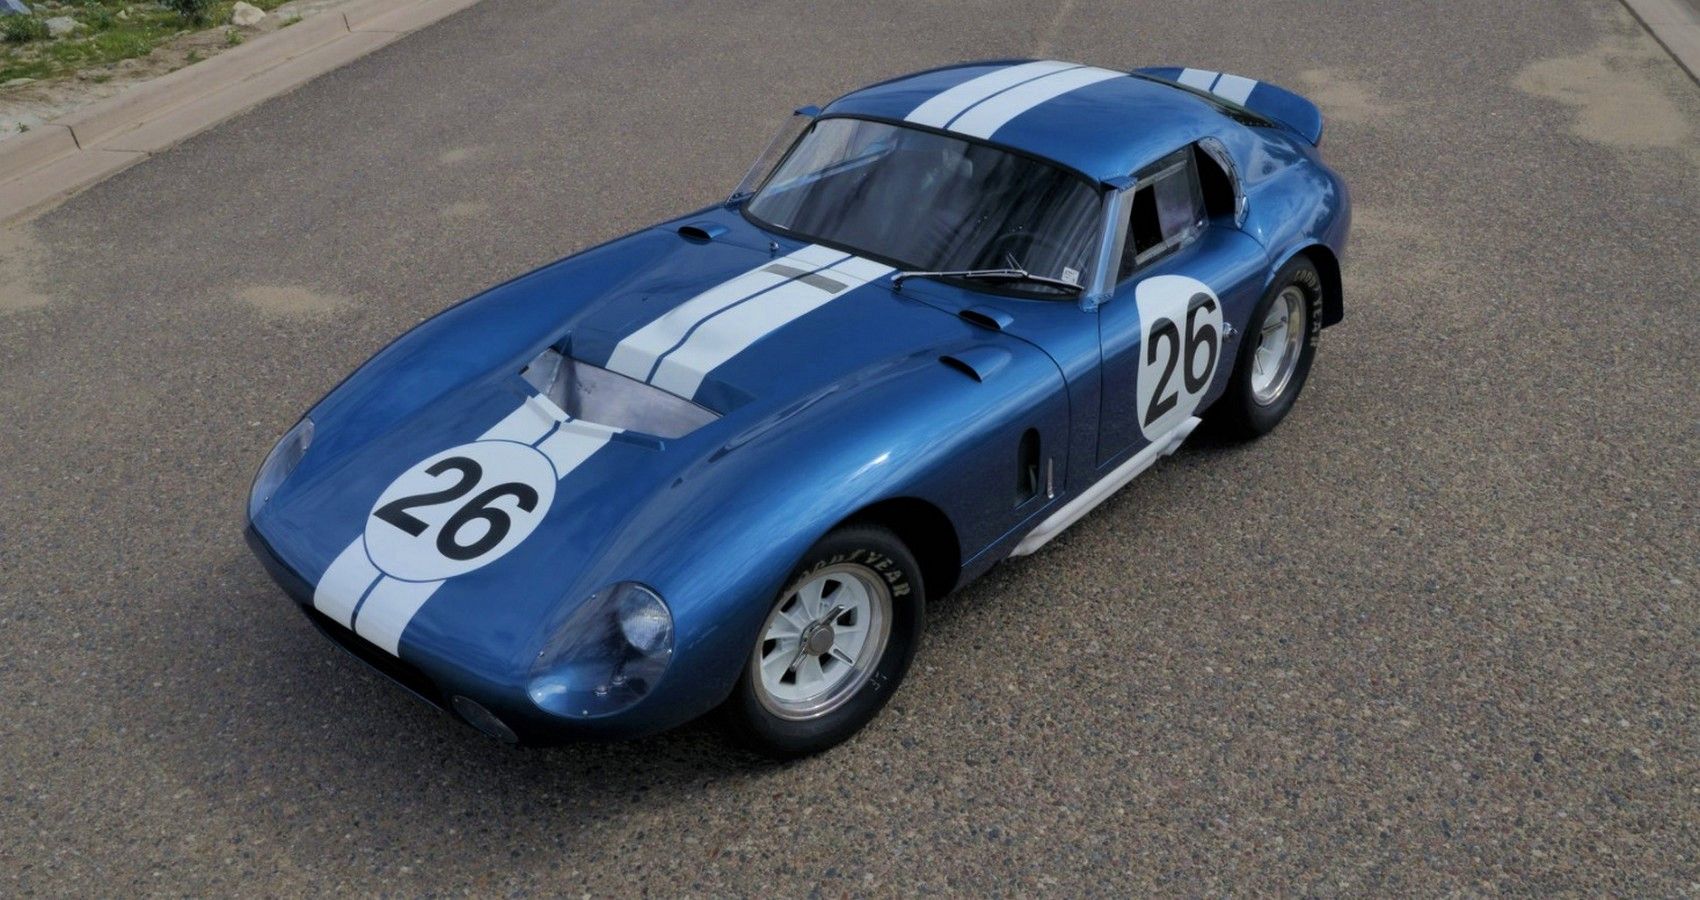 Blue 1965 Shelby Daytona Coupe Parked On The Road